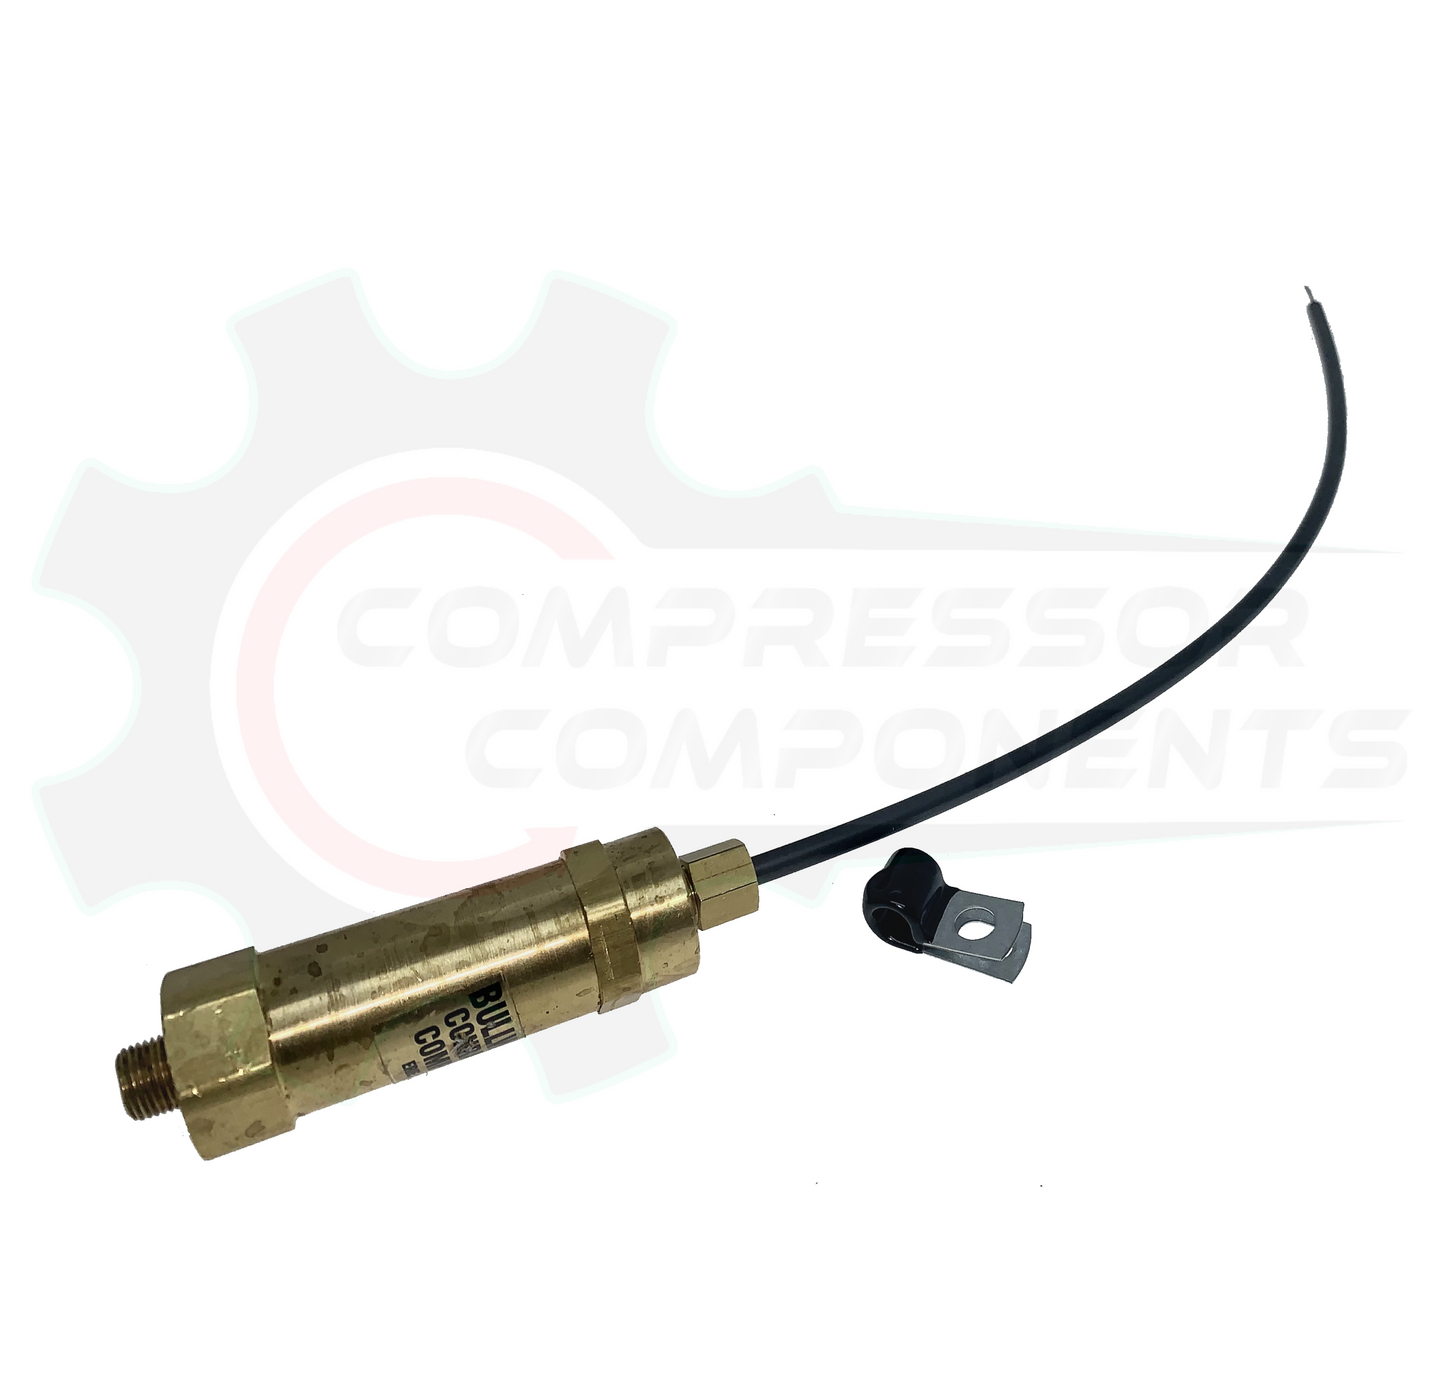 CONRADER HEAVY DUTY THROTTLE CONTROL UNLOADER CABLE / BULLWHIP - 1/4" COMPRESSION  REAR INLET / 12-60 INCHS LONG